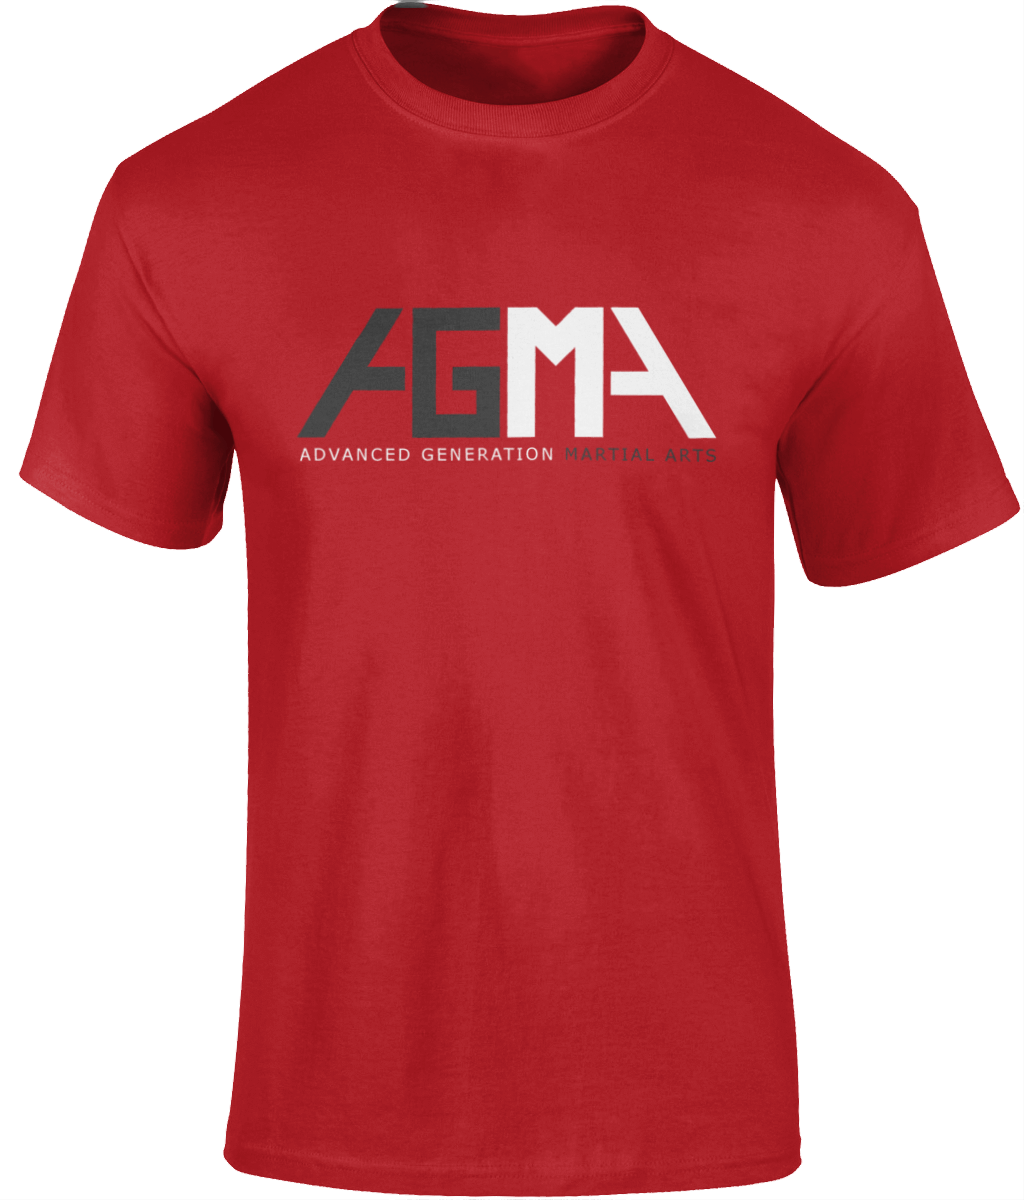 AGMA T-shirt - Red - Adults